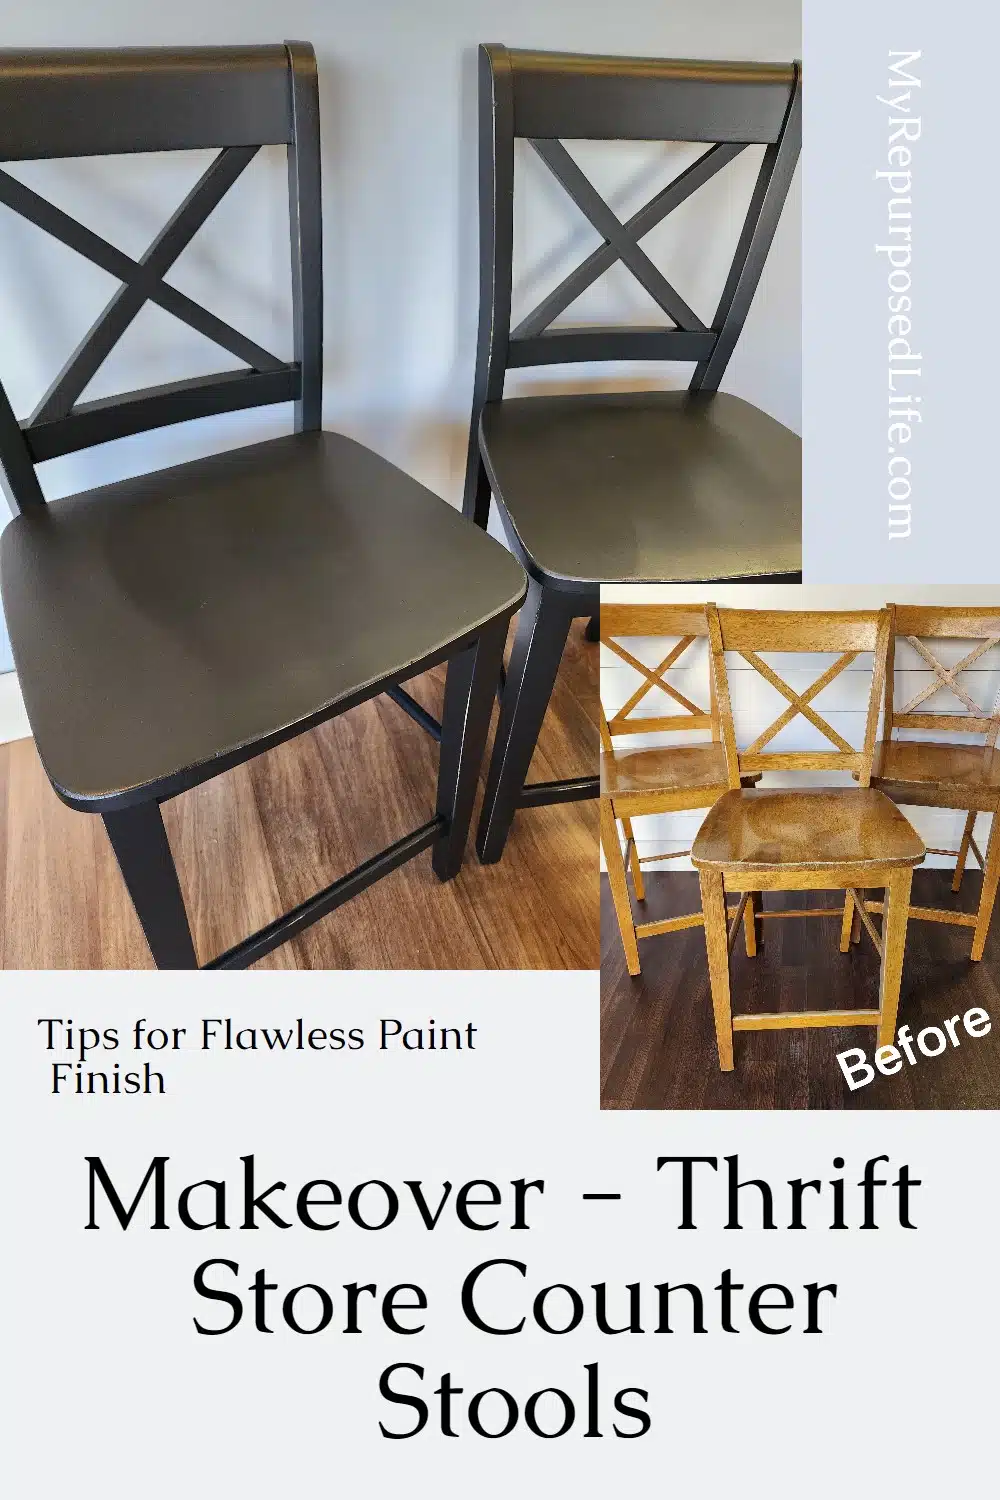 Thrift store X back counter stools get a flawless paint finish makeover and update. Sav $300 by shopping second hand and doing it yourself. #MyRepurposedLife #counterstools #thriftstore via @repurposedlife